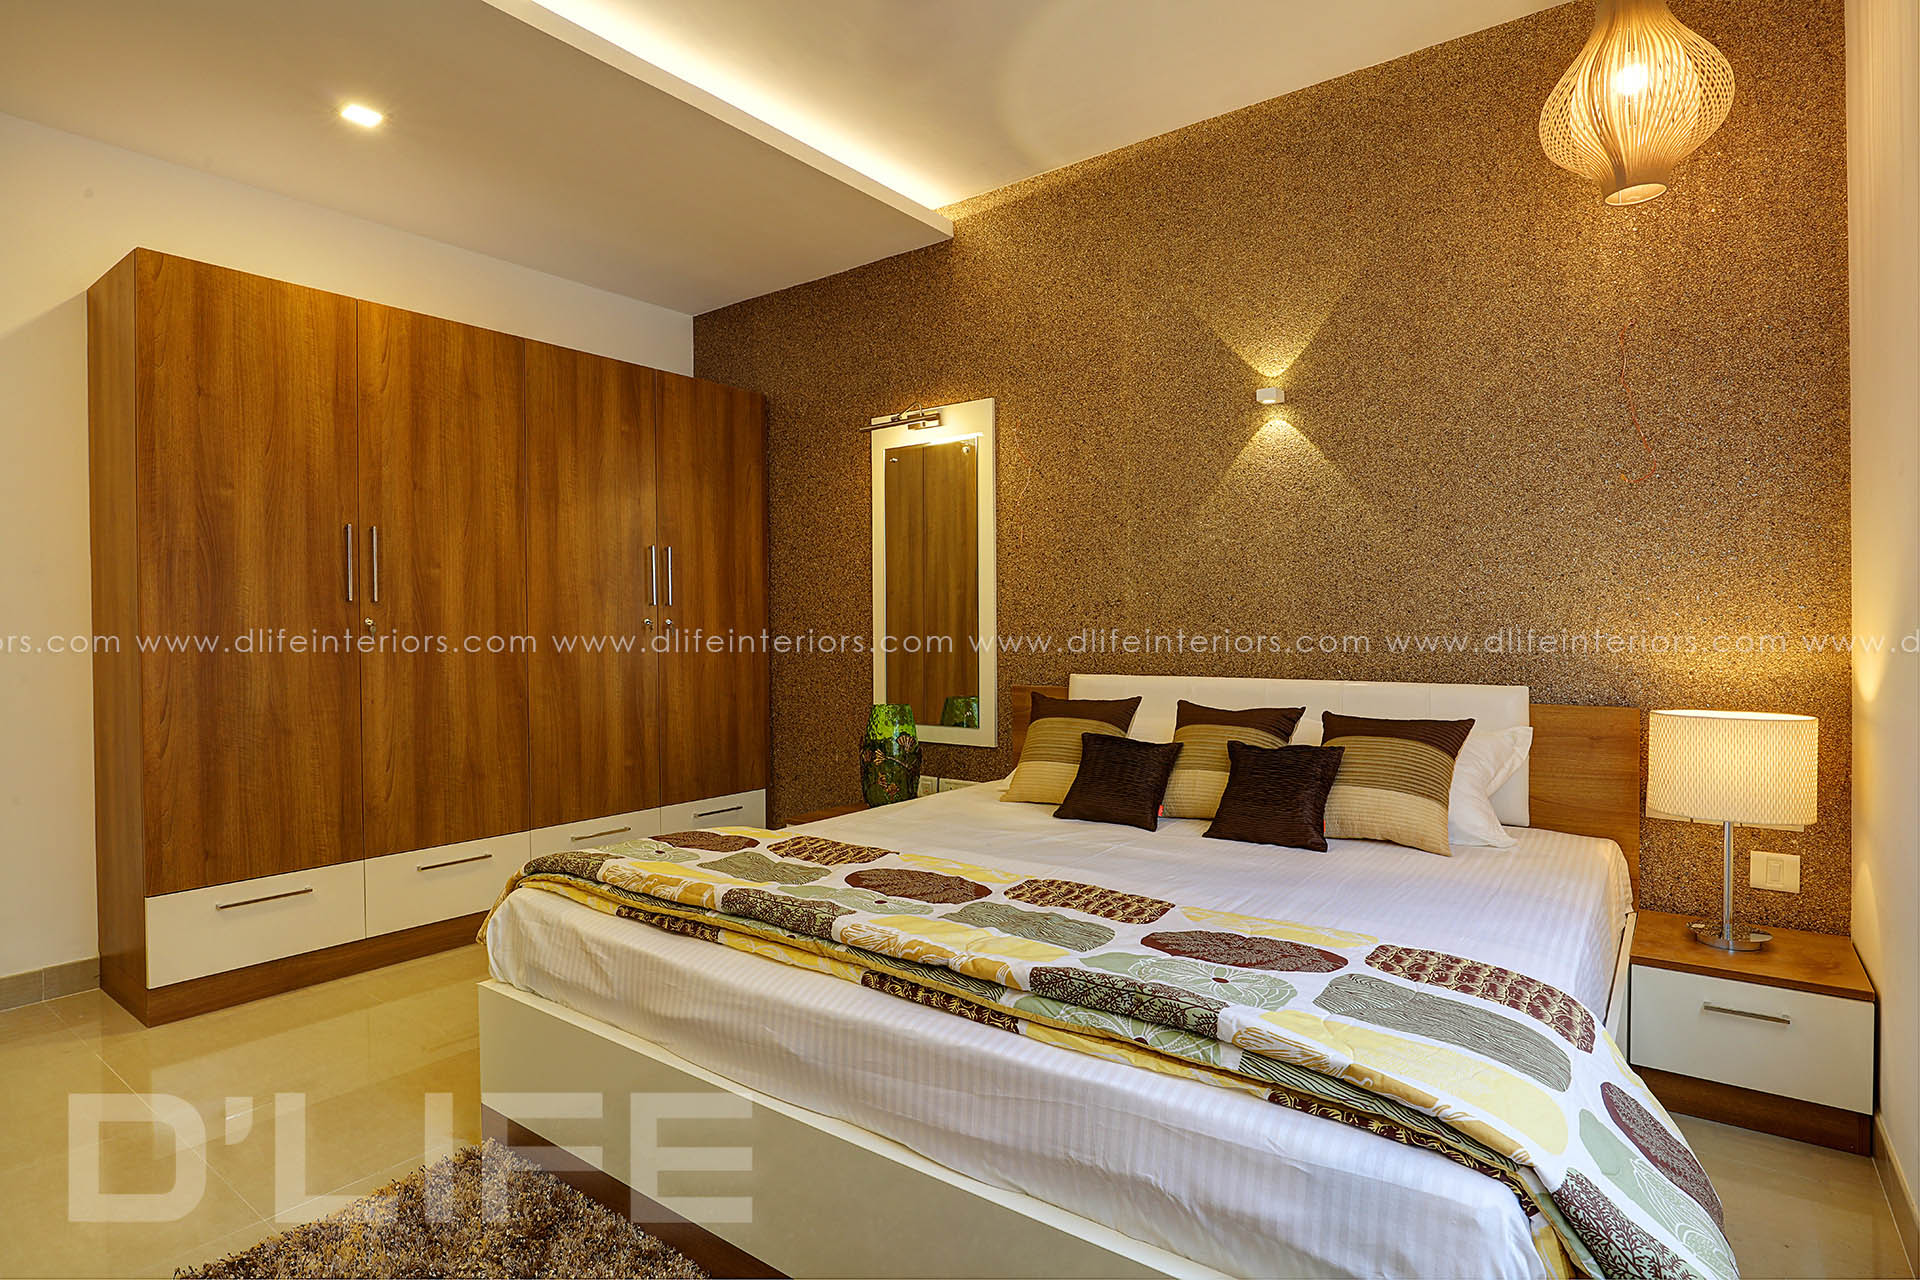 Bed Room Interiors In Kerala As Part Of Home Furnishing - Interior Design , HD Wallpaper & Backgrounds